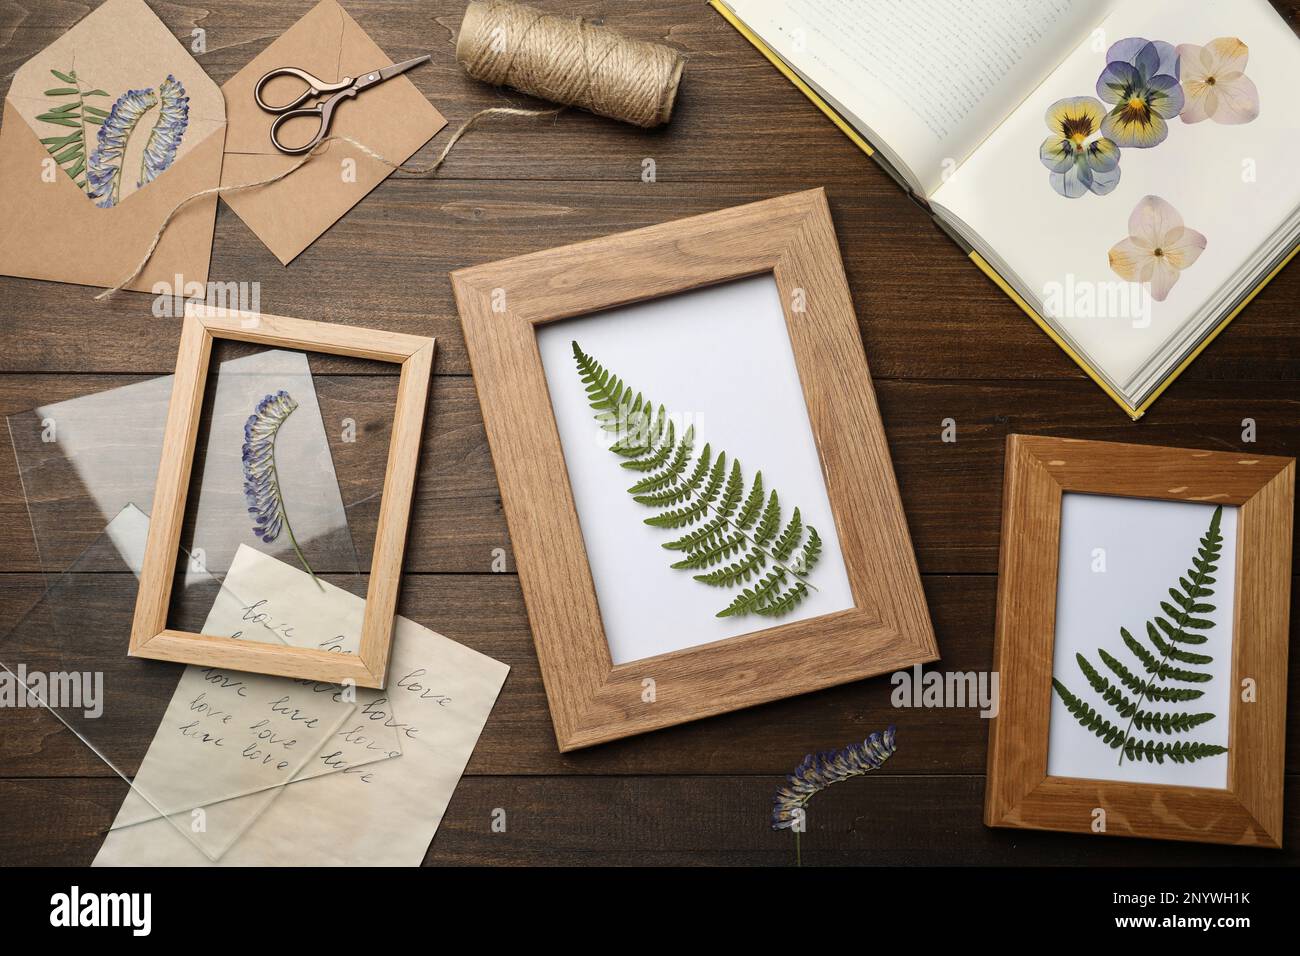 Flat lay composition with dried flowers and plants on wooden table Stock Photo